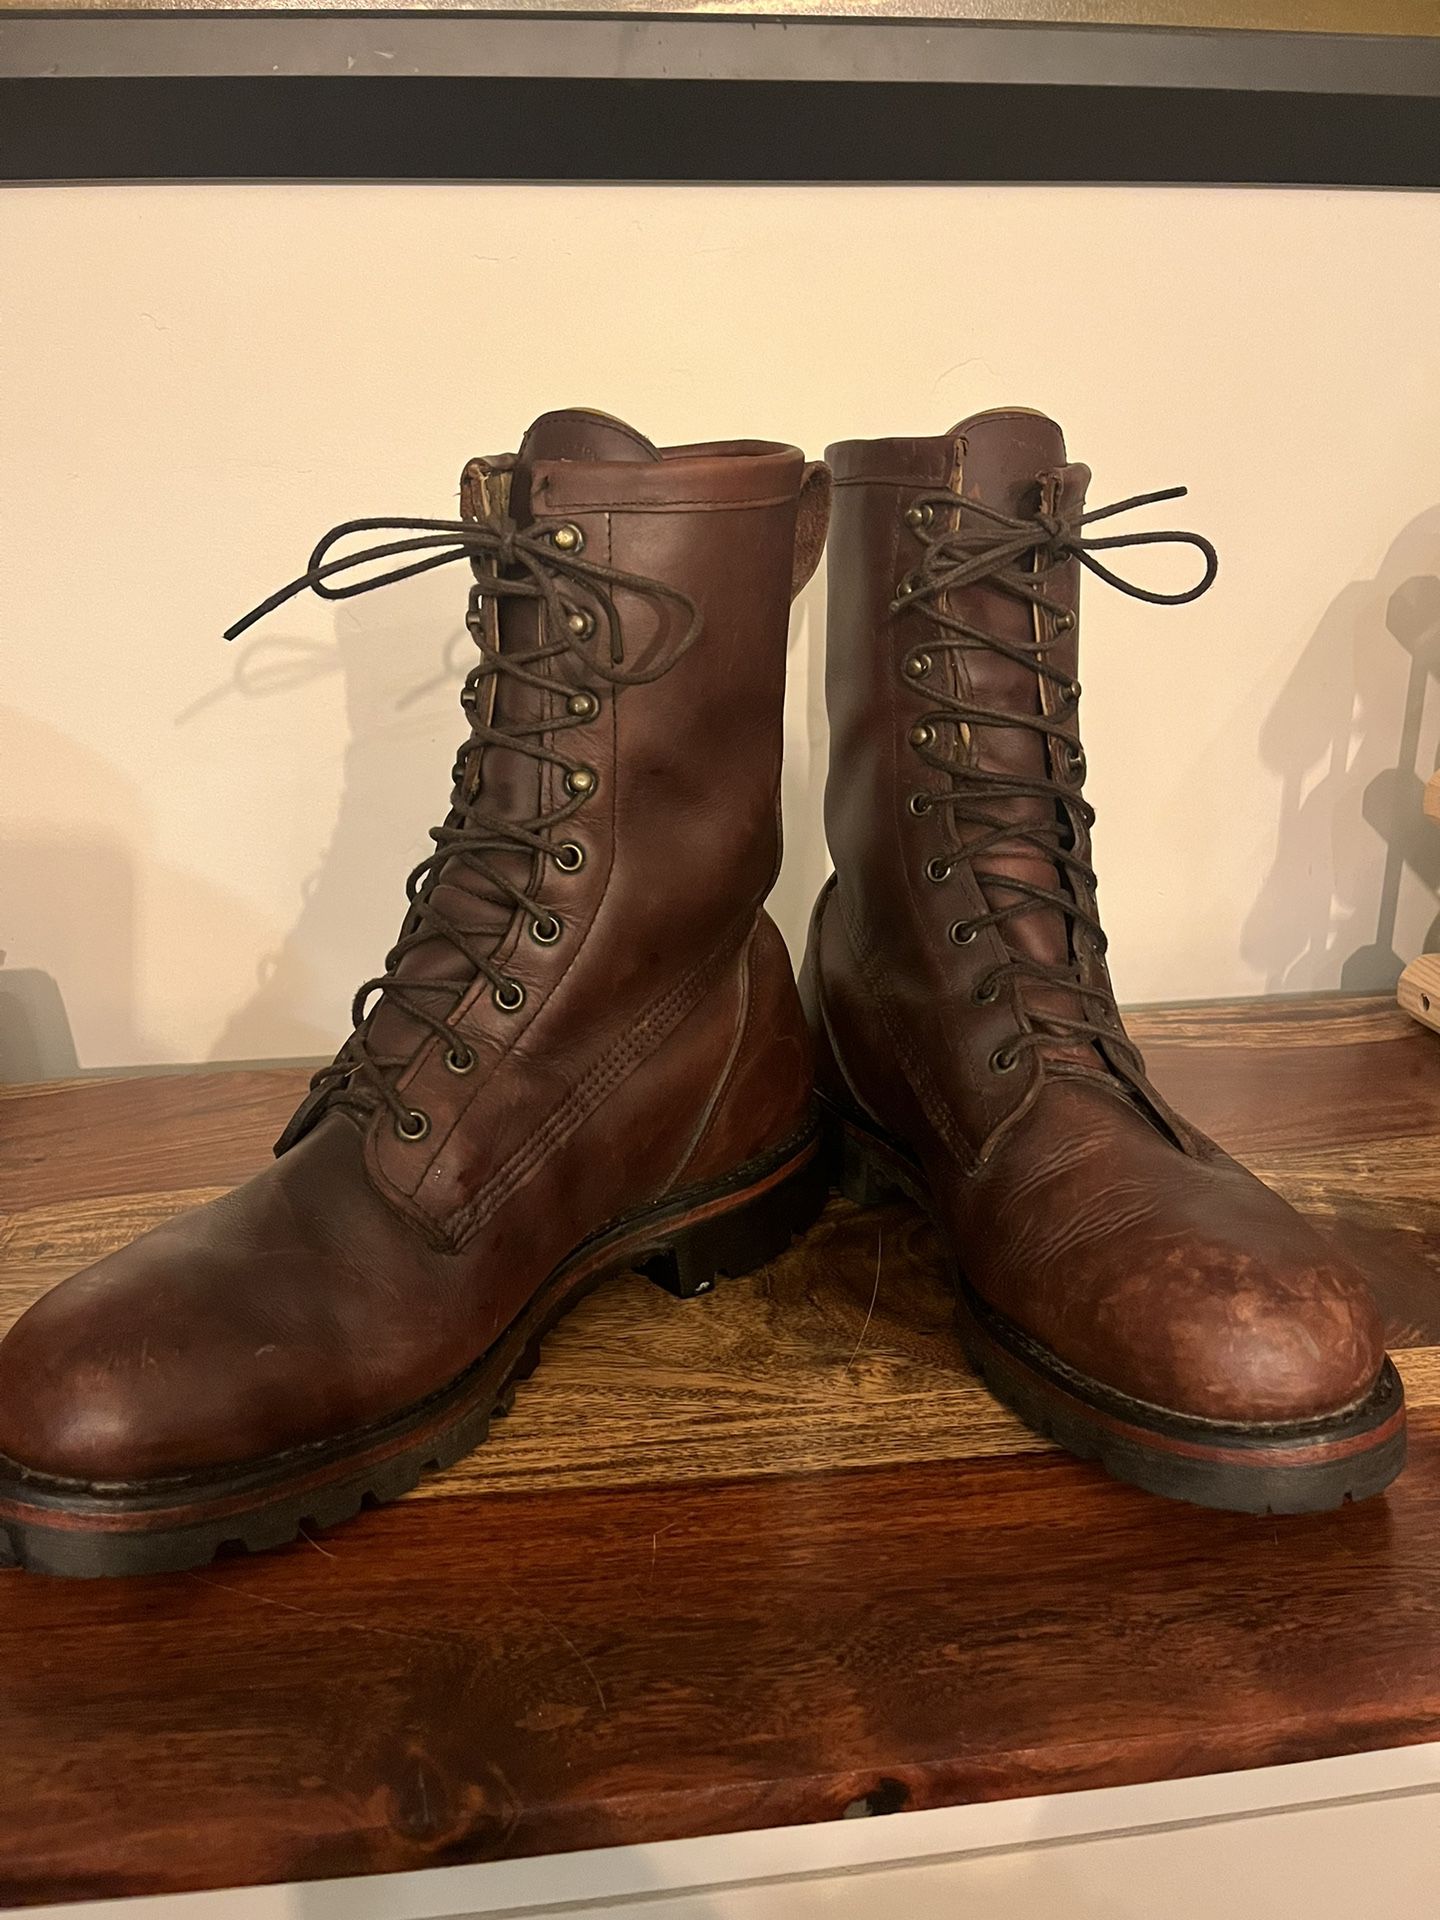 Leather Boots, Boots, Men’s Boots, Filson, Filson Leather Boots, Redwing, Workwear, Carhartt 